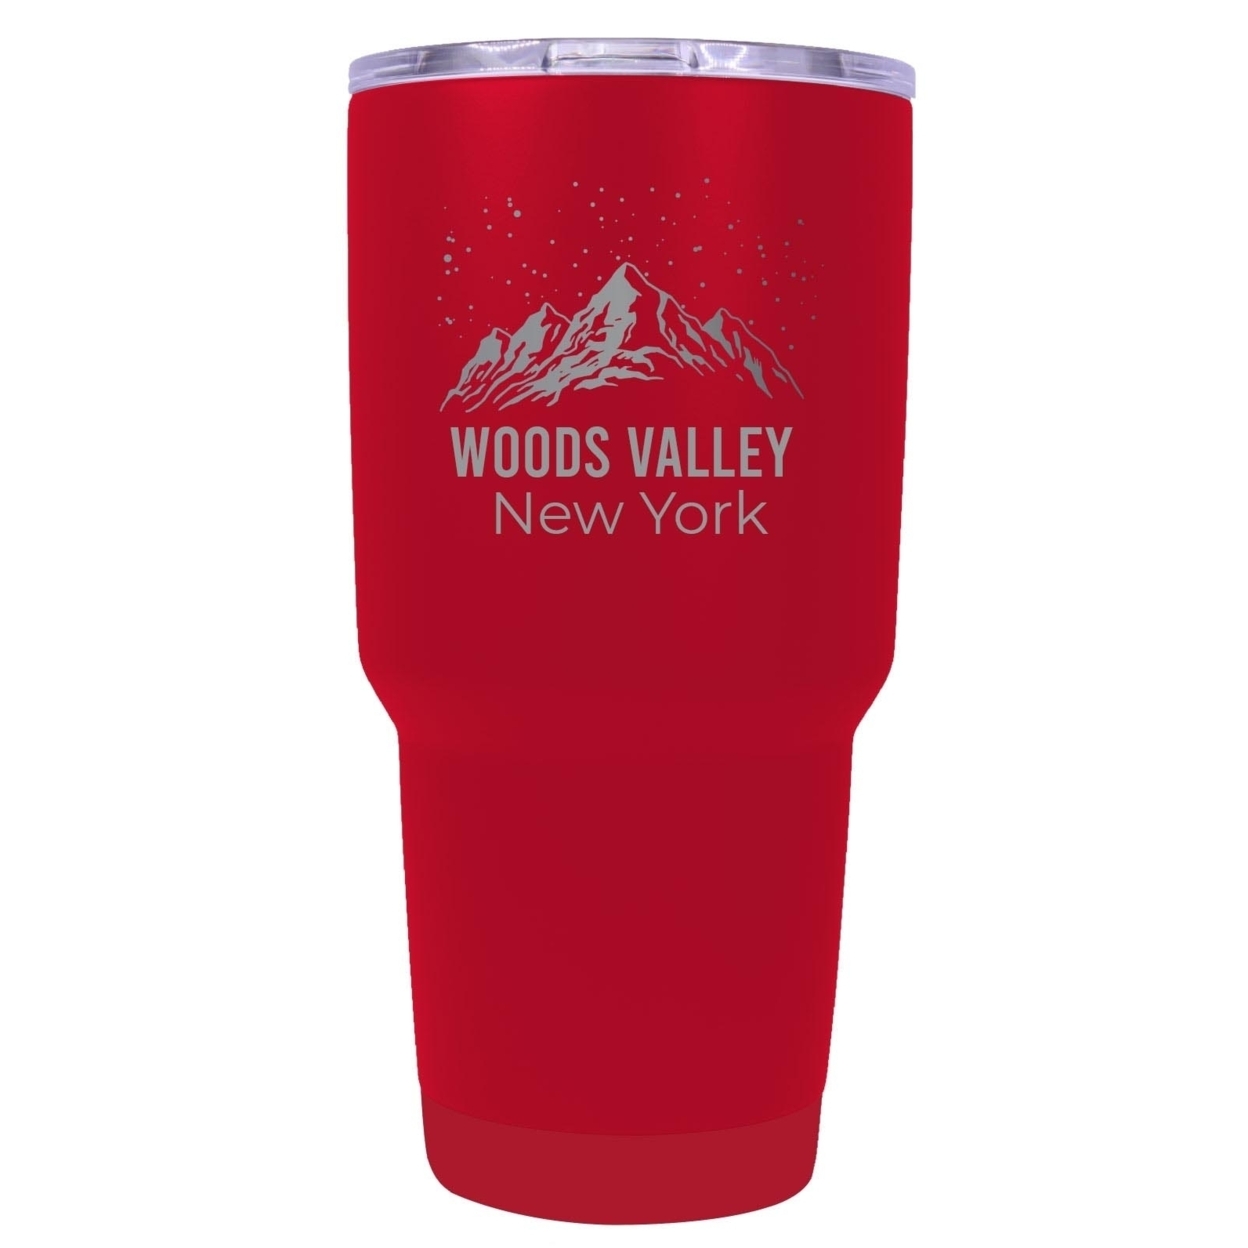 Woods Valley New York Ski Snowboard Winter Souvenir Laser Engraved 24 Oz Insulated Stainless Steel Tumbler - Red